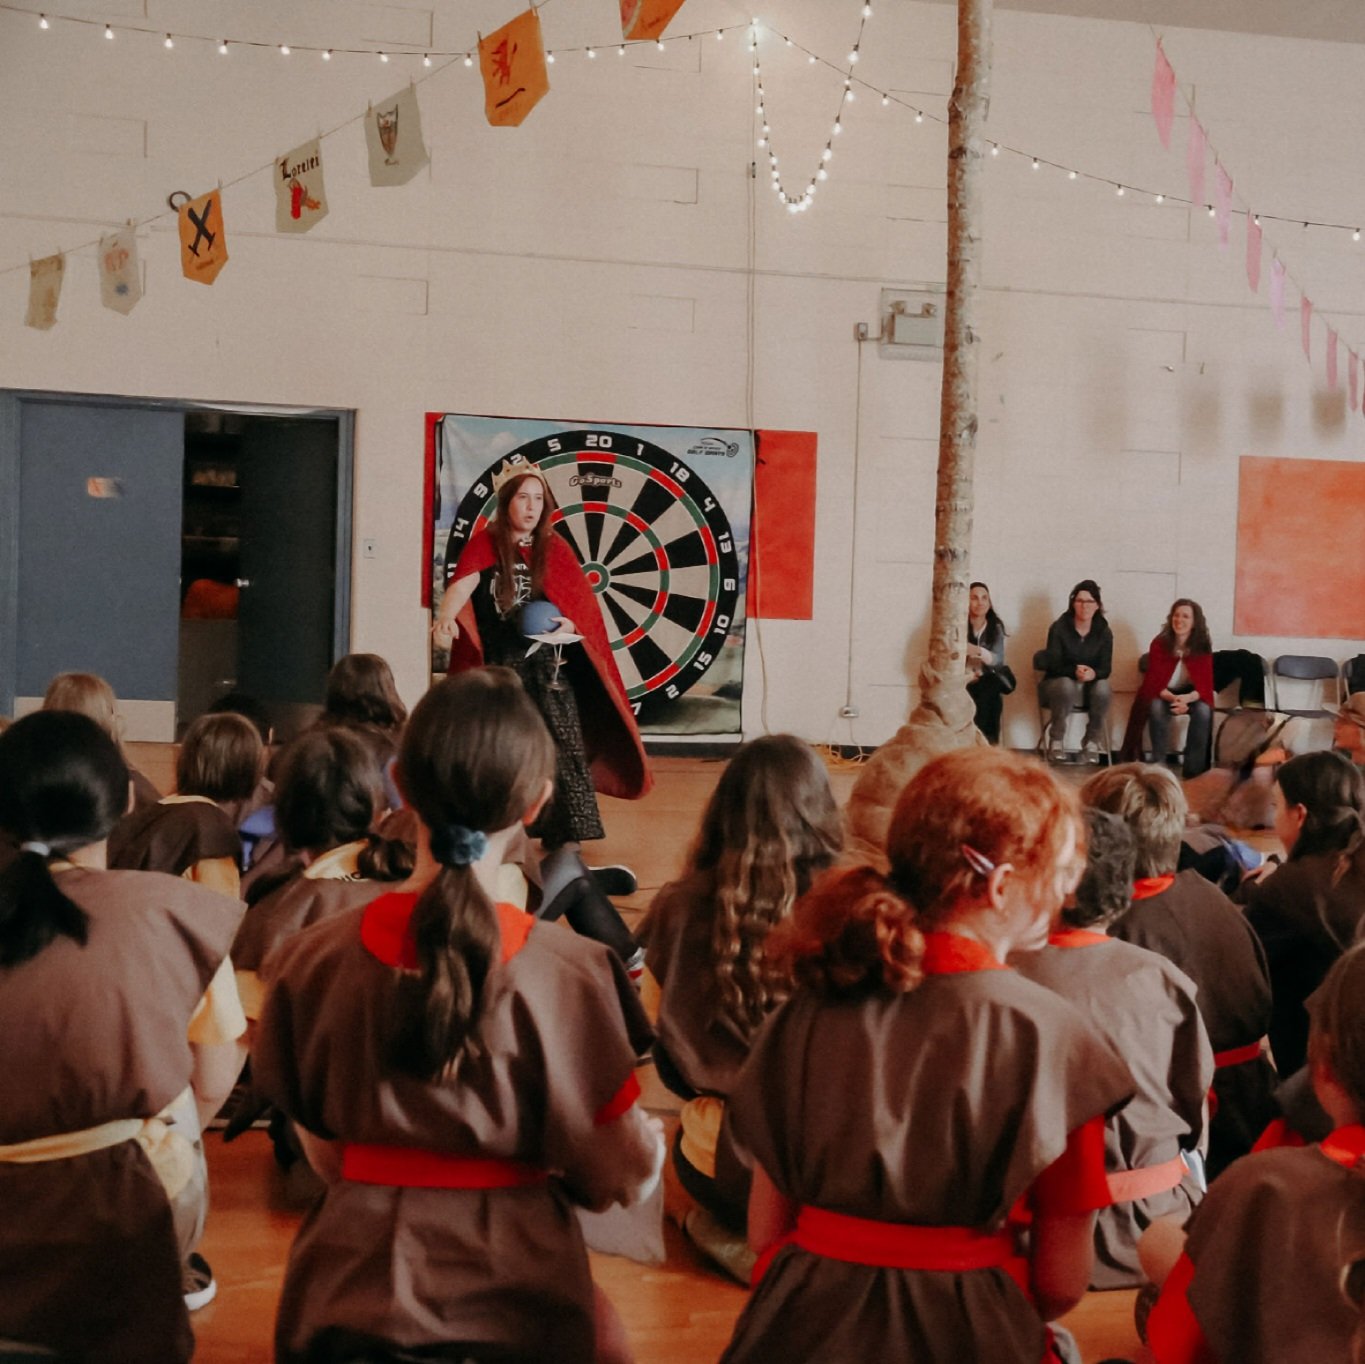 Recently, the students of Class 6 were hosted by our Grade 6 cohort at the Waldorf Independent School of Edmonton (WISE) to participate in the &lsquo;Medieval Games&rsquo;. Together, they enjoyed active games of combat archery, pool-noodle jousting, 